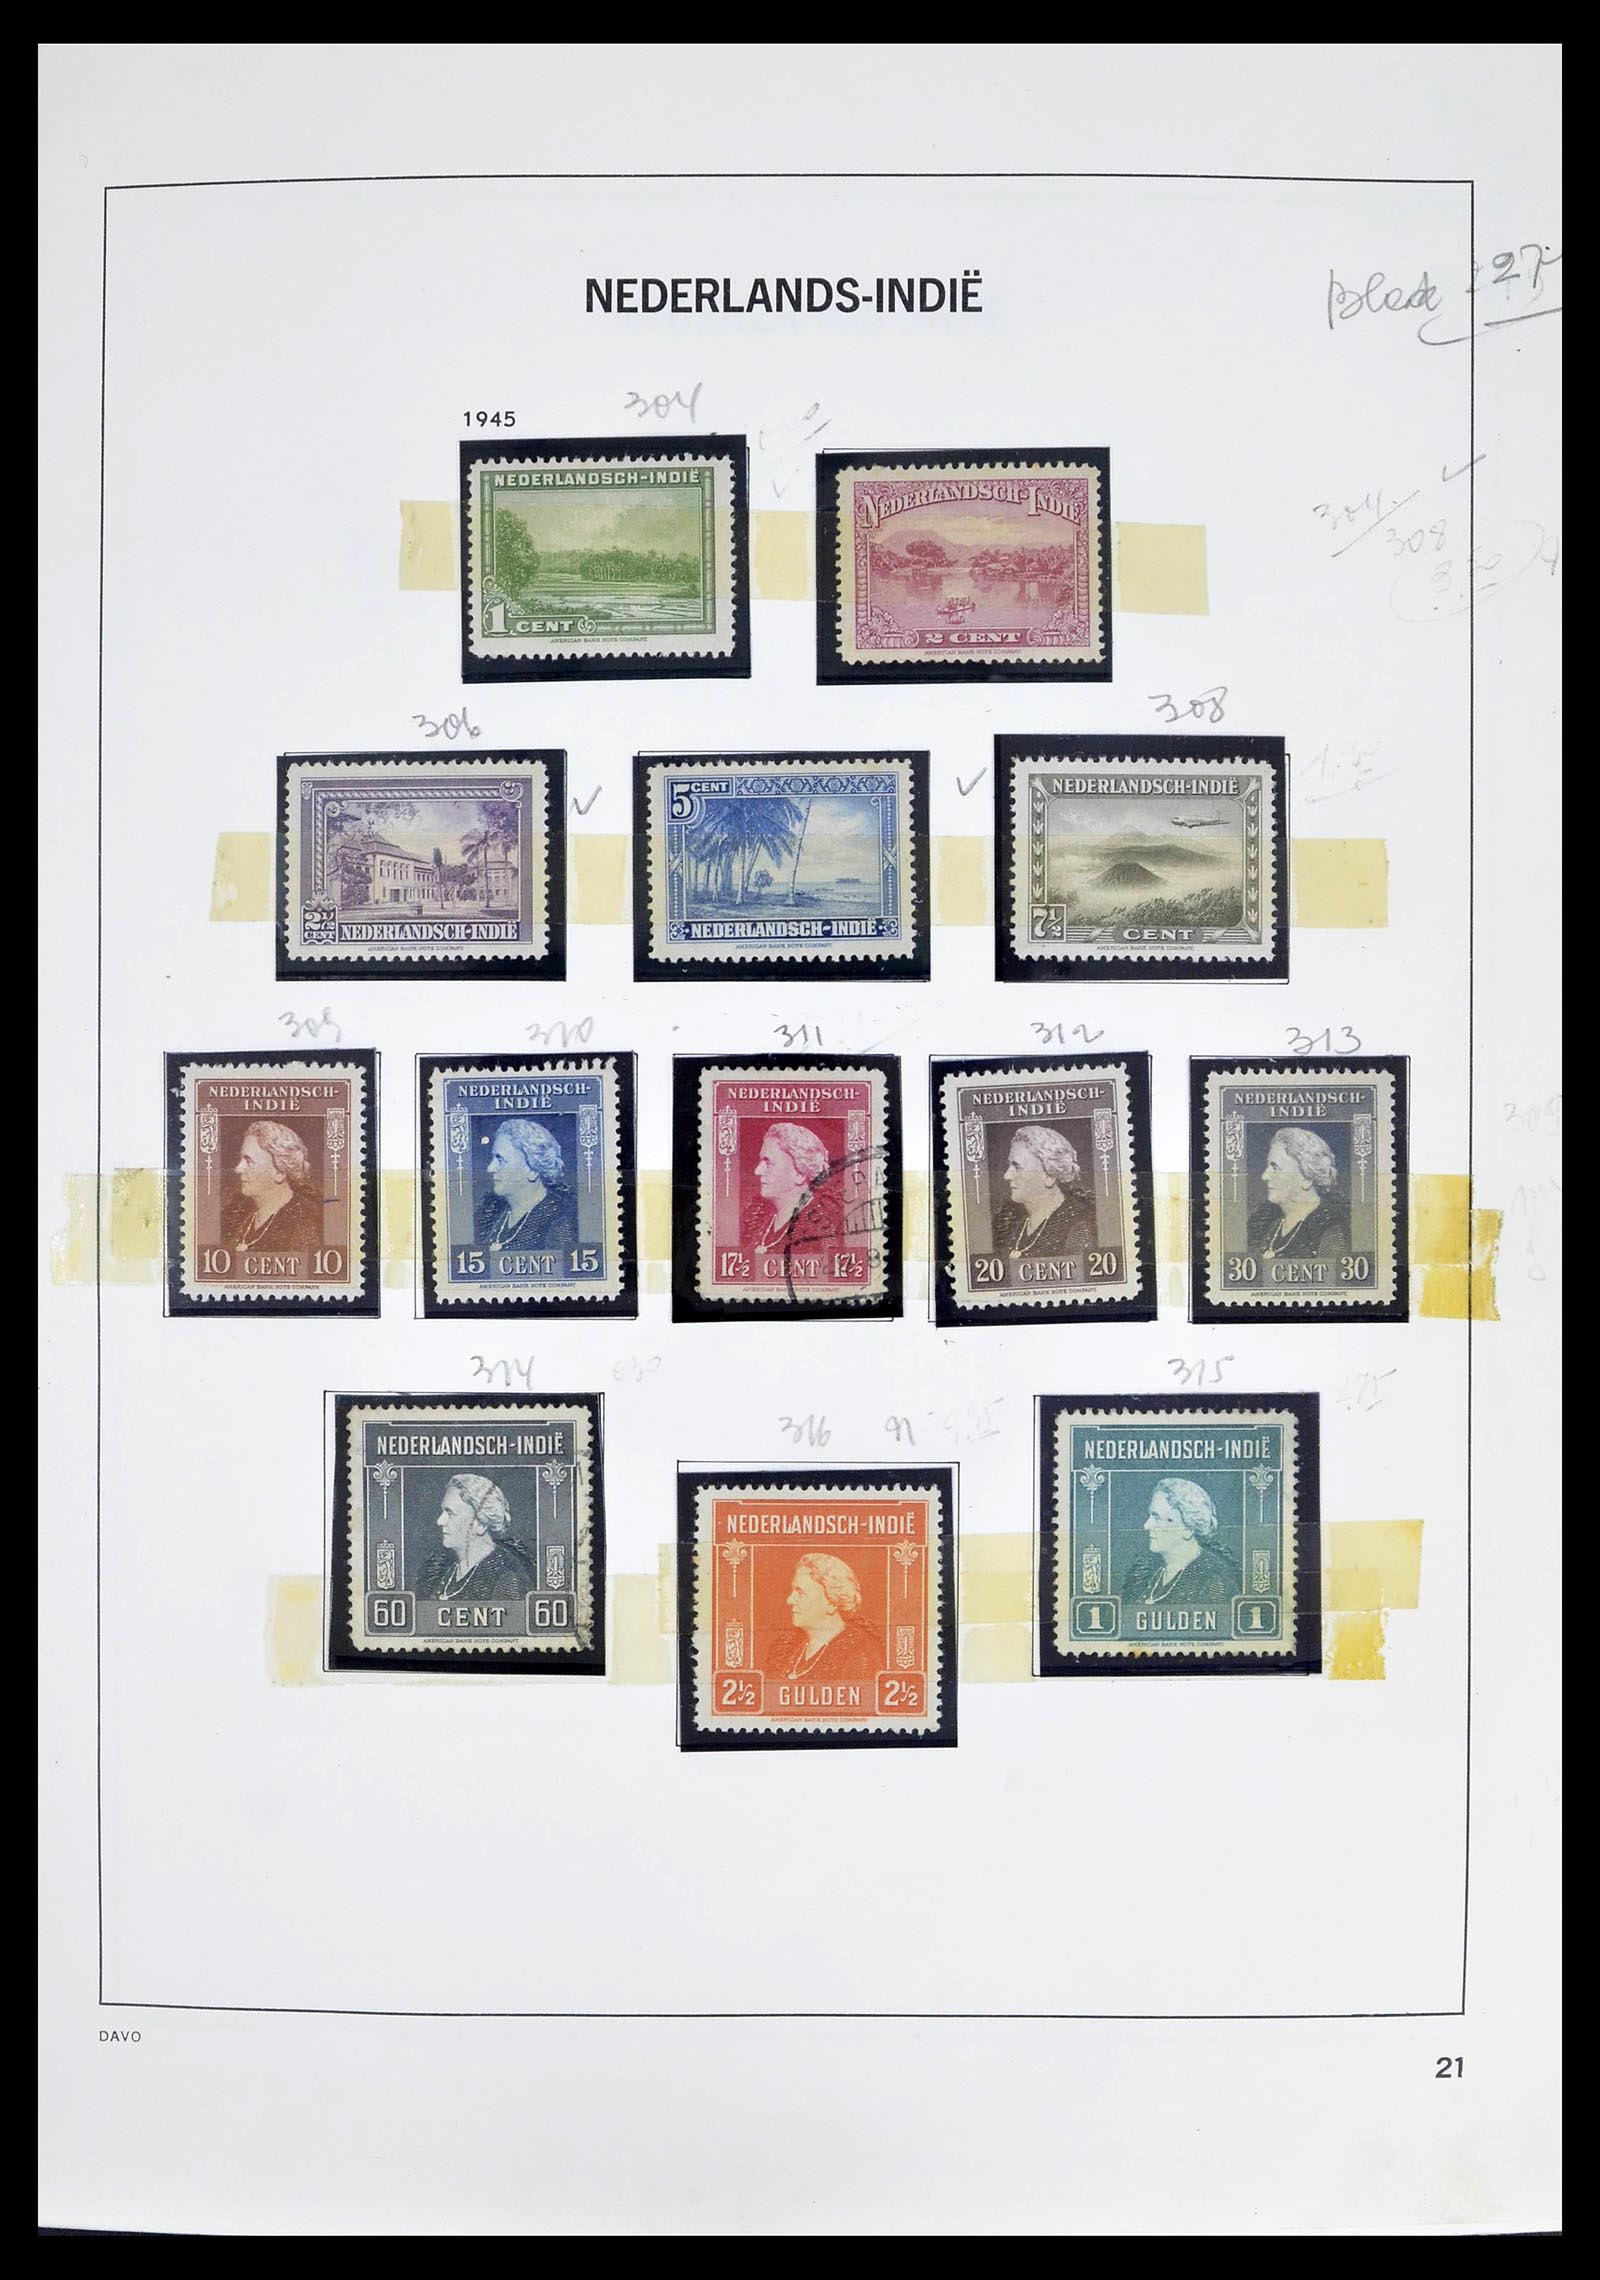 39263 0022 - Stamp collection 39263 Dutch territories 1864-1970.